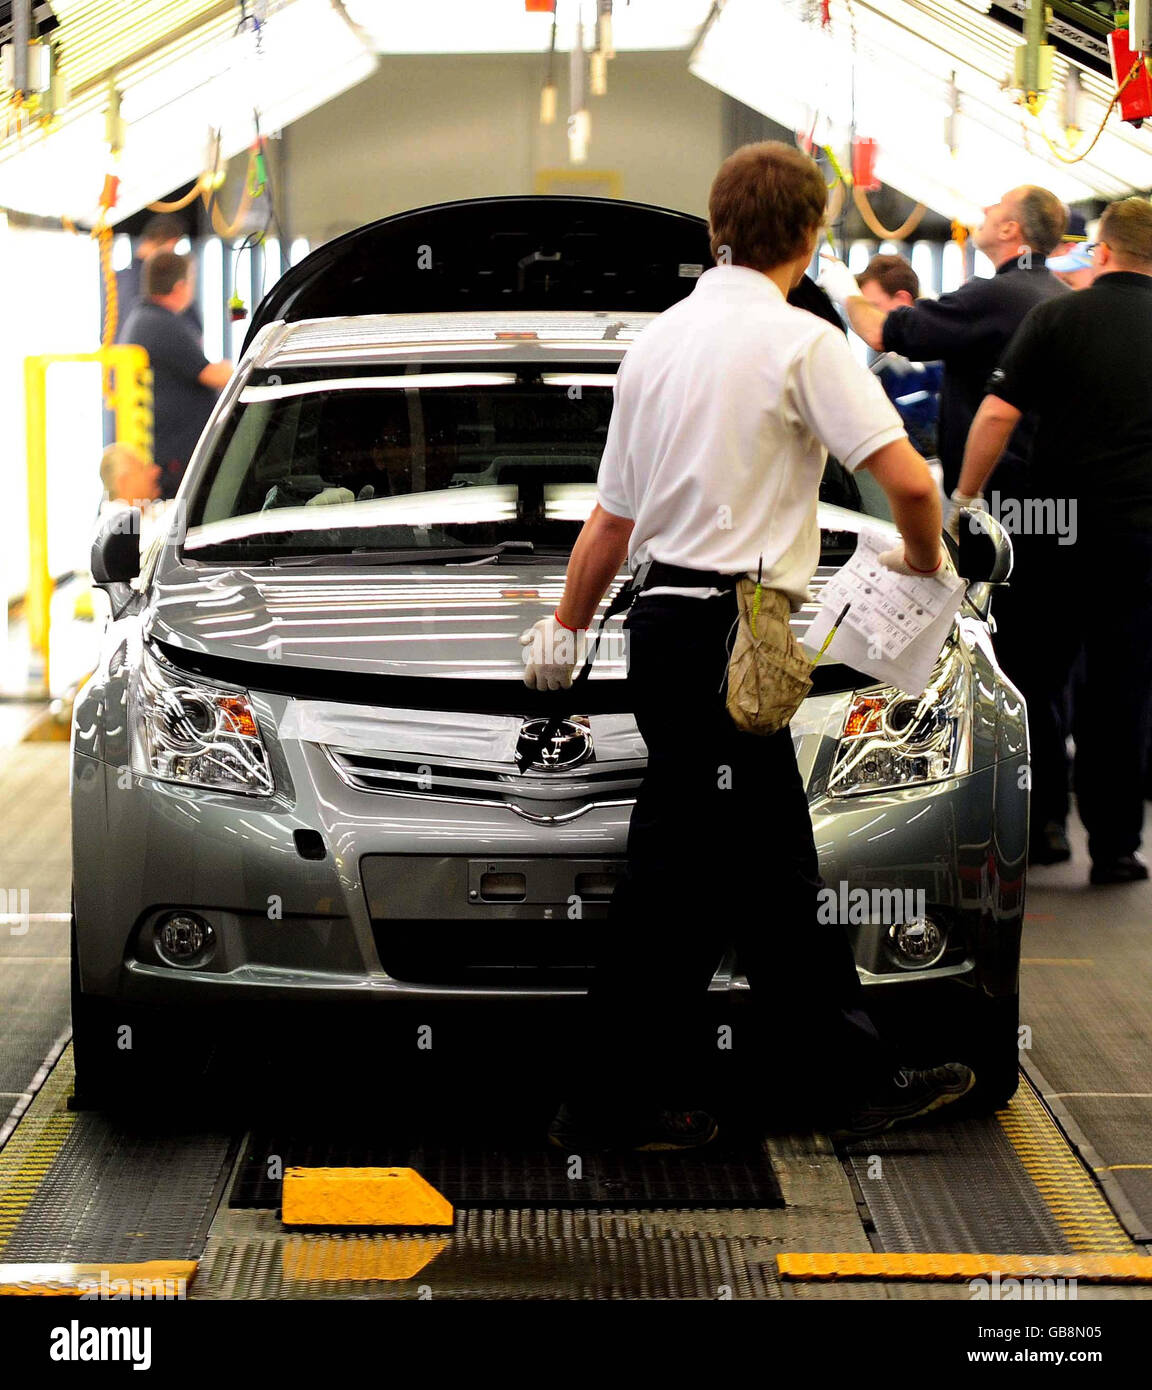 The new Toyota Avensis car rolls off the line today, marking the official start of production of Toyota's new flagship vehicle at The Burnaston Plant in Derbyshire. Stock Photo